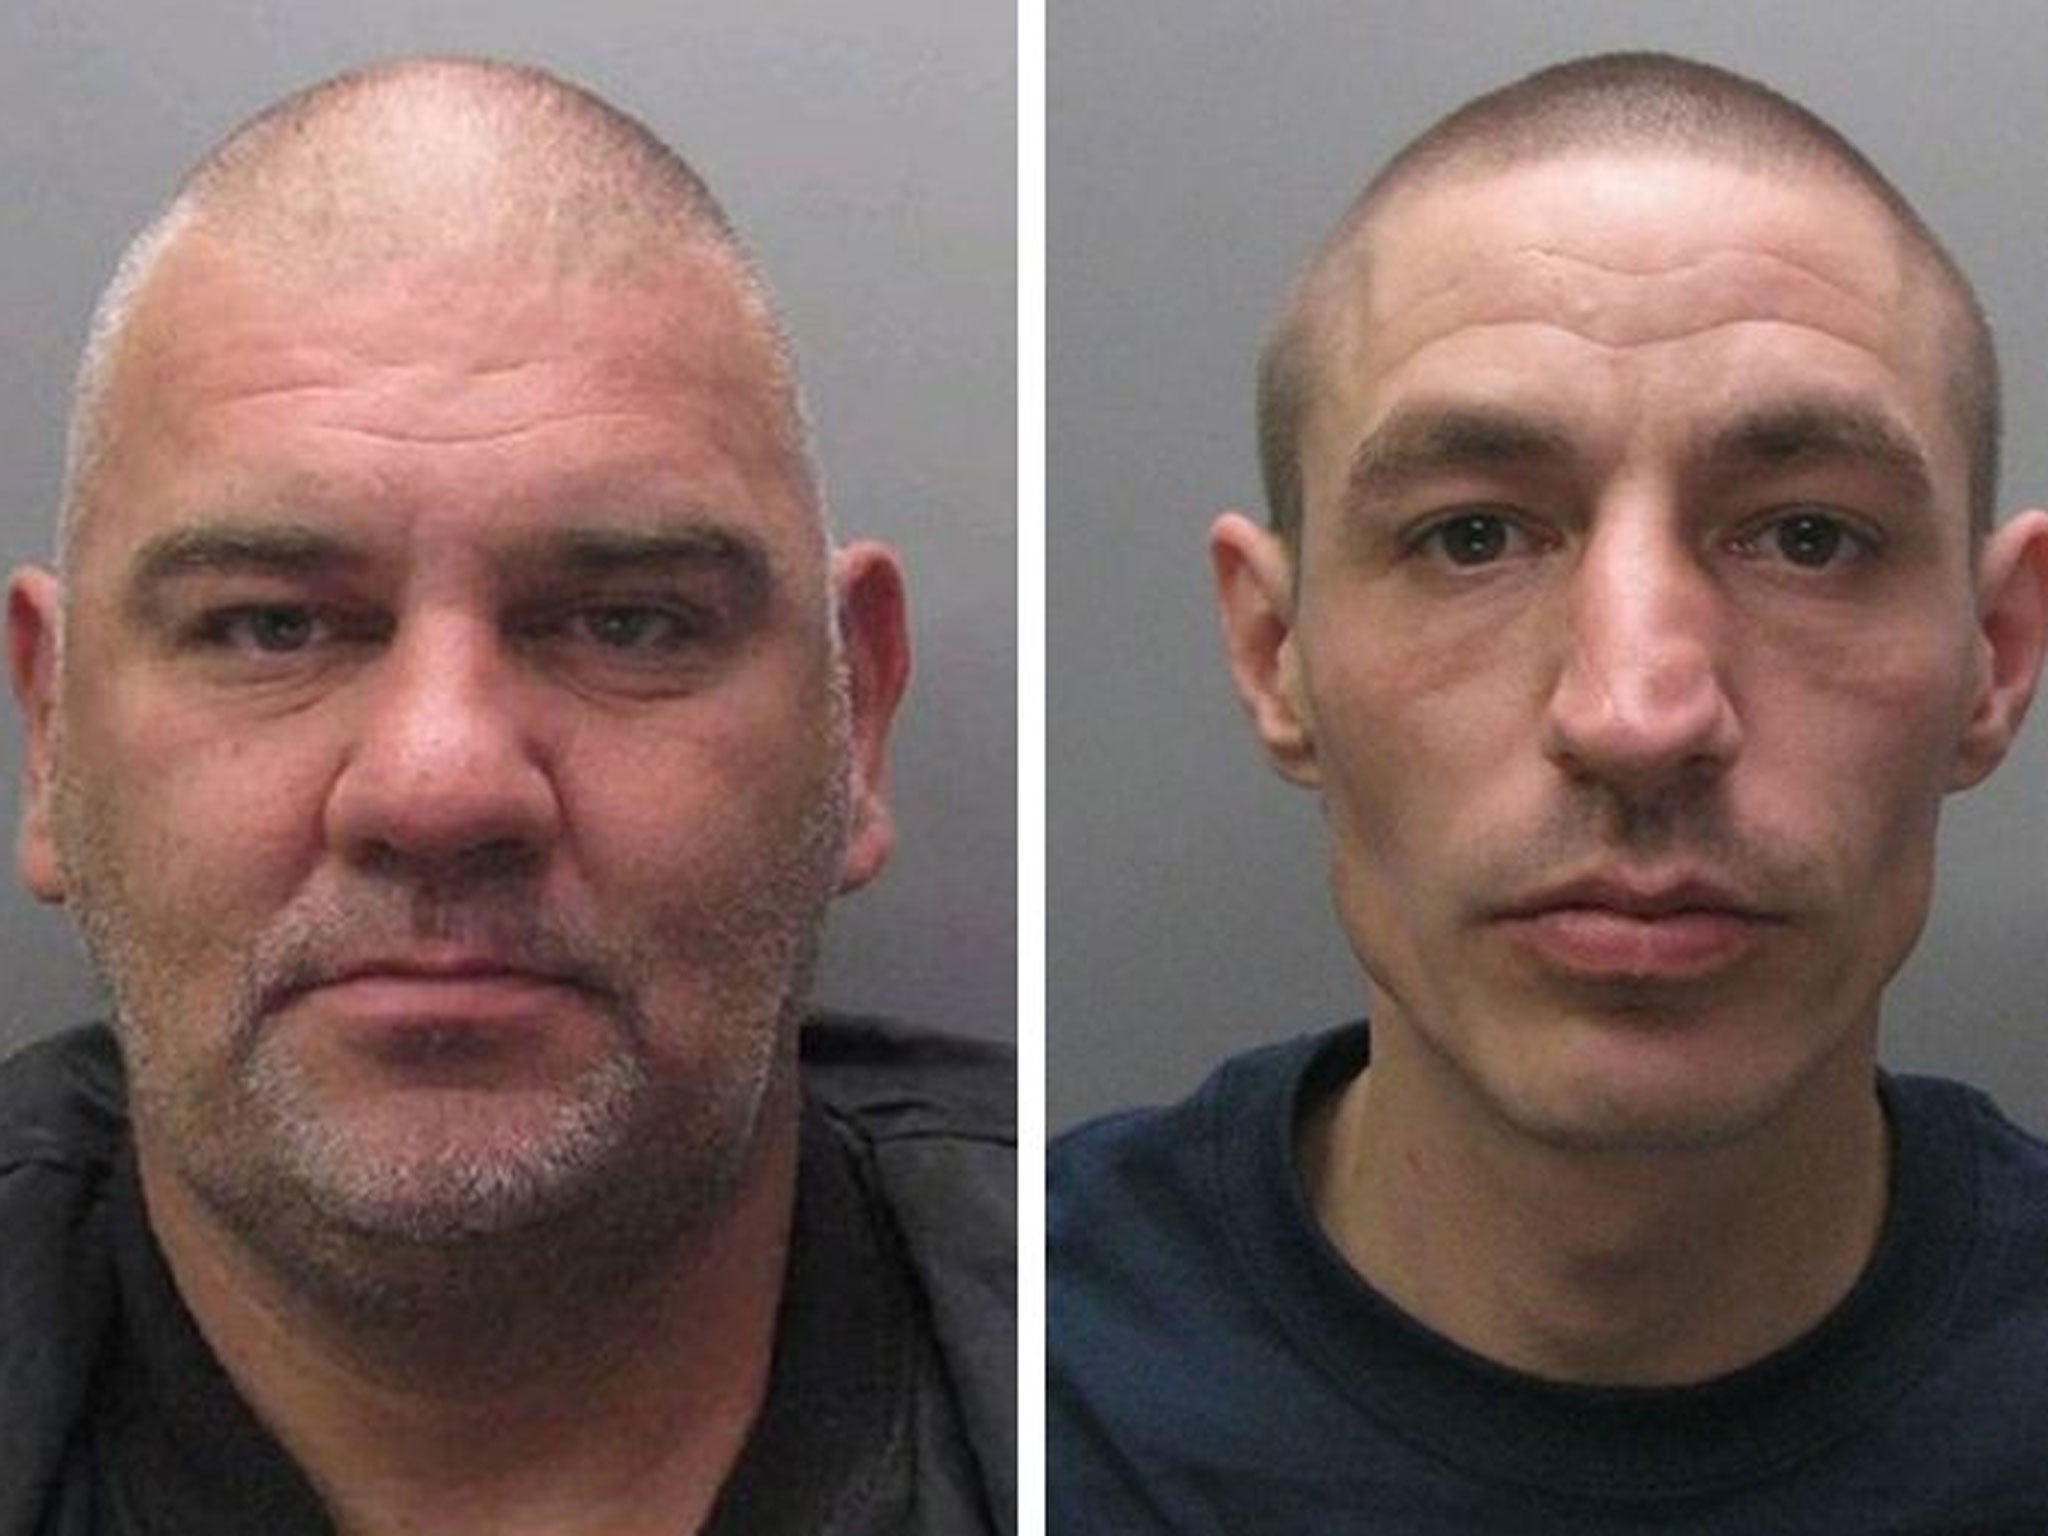 Undated handout photos of (left to right) Gary 'Stretch' Richards, 47, and Leslie Layton, 36, who aided serial killer Joanna Dennehy and have been convicted of further offences relating to her killing spree.